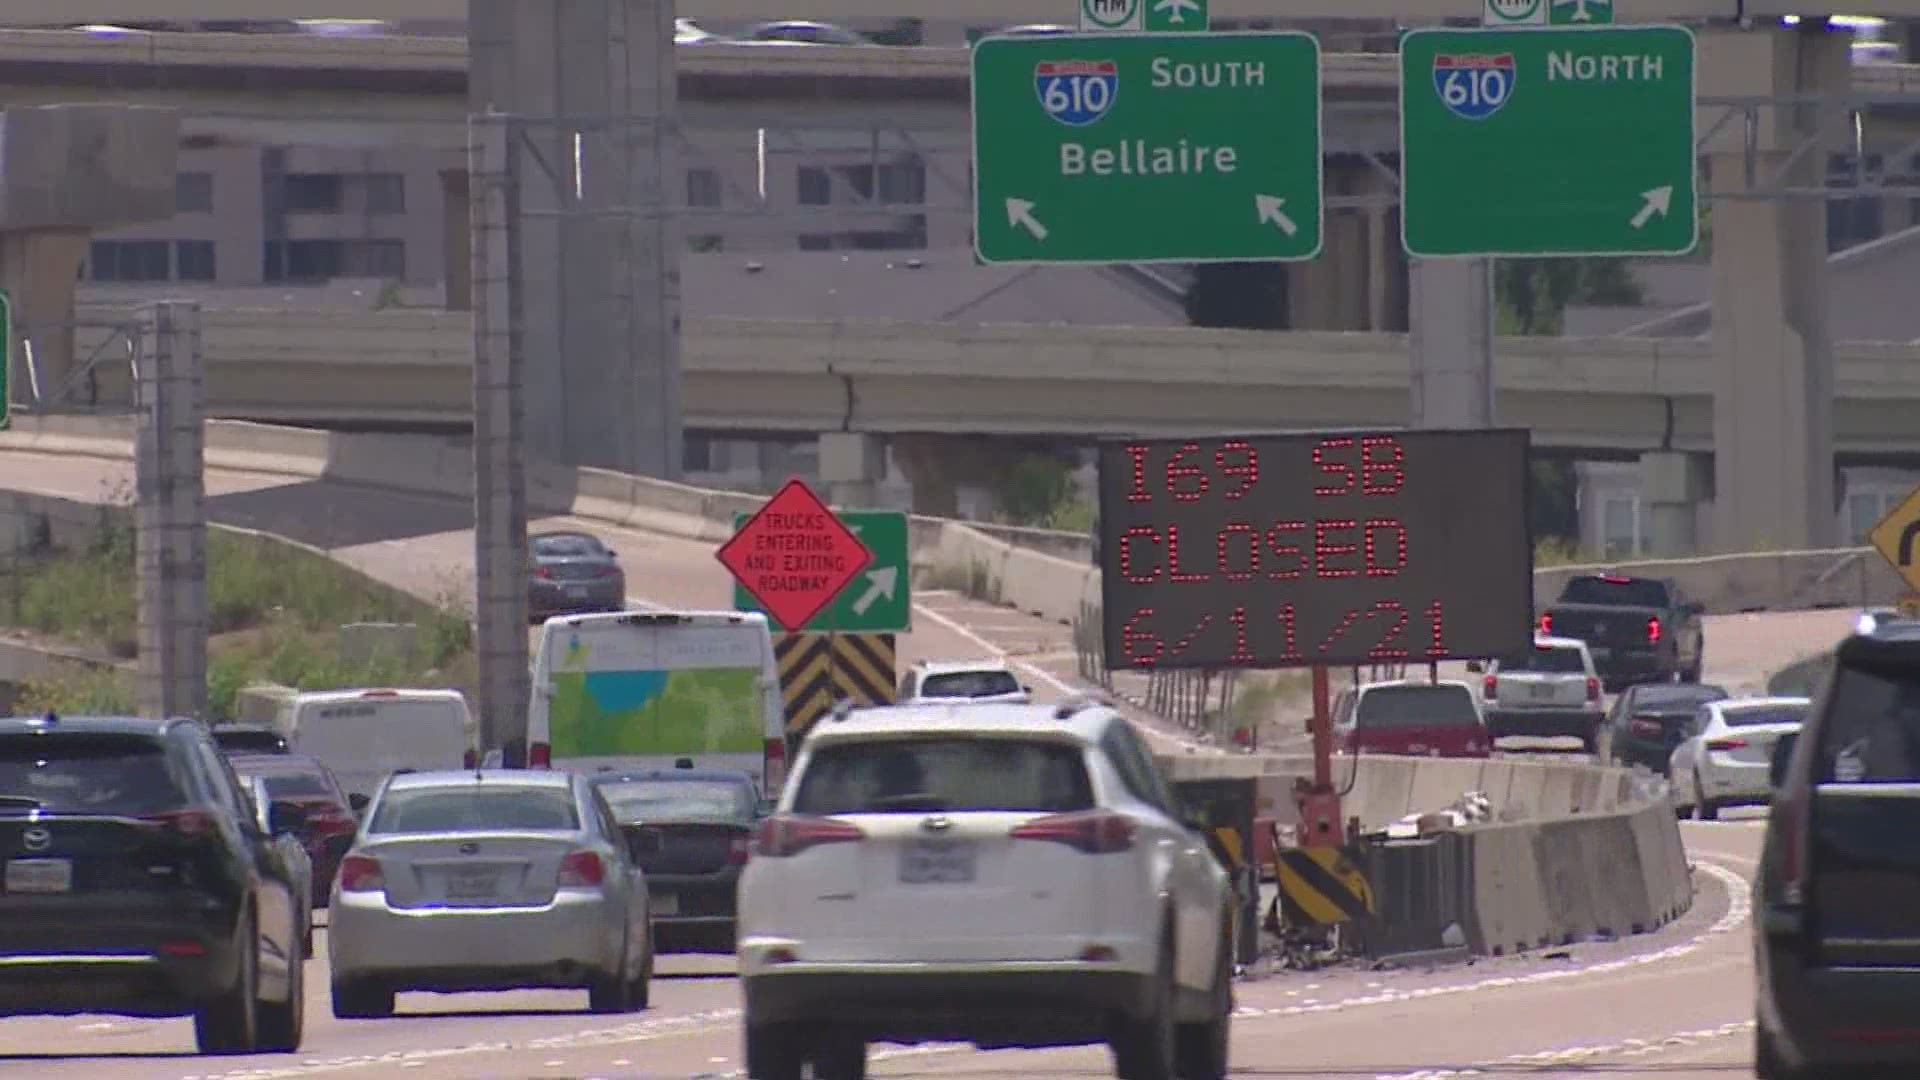 With the closures around the 610 Loop and Southwest Freeway starting this week comes new traffic problems for drivers.